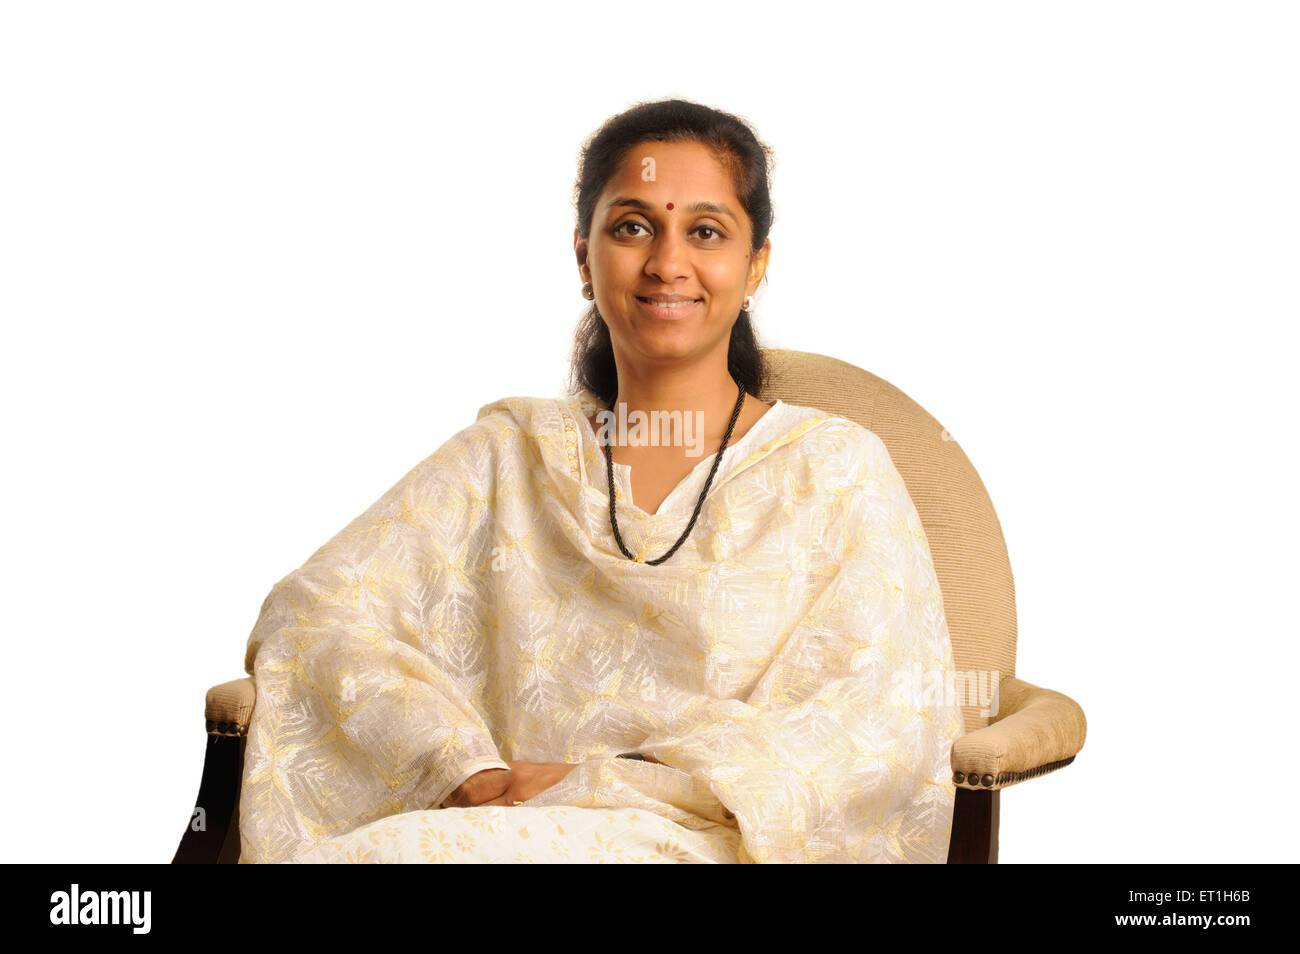 Supriya Sule Indian politician NCP Nationalist Congress Party Member of Parliament India Asia Stock Photo